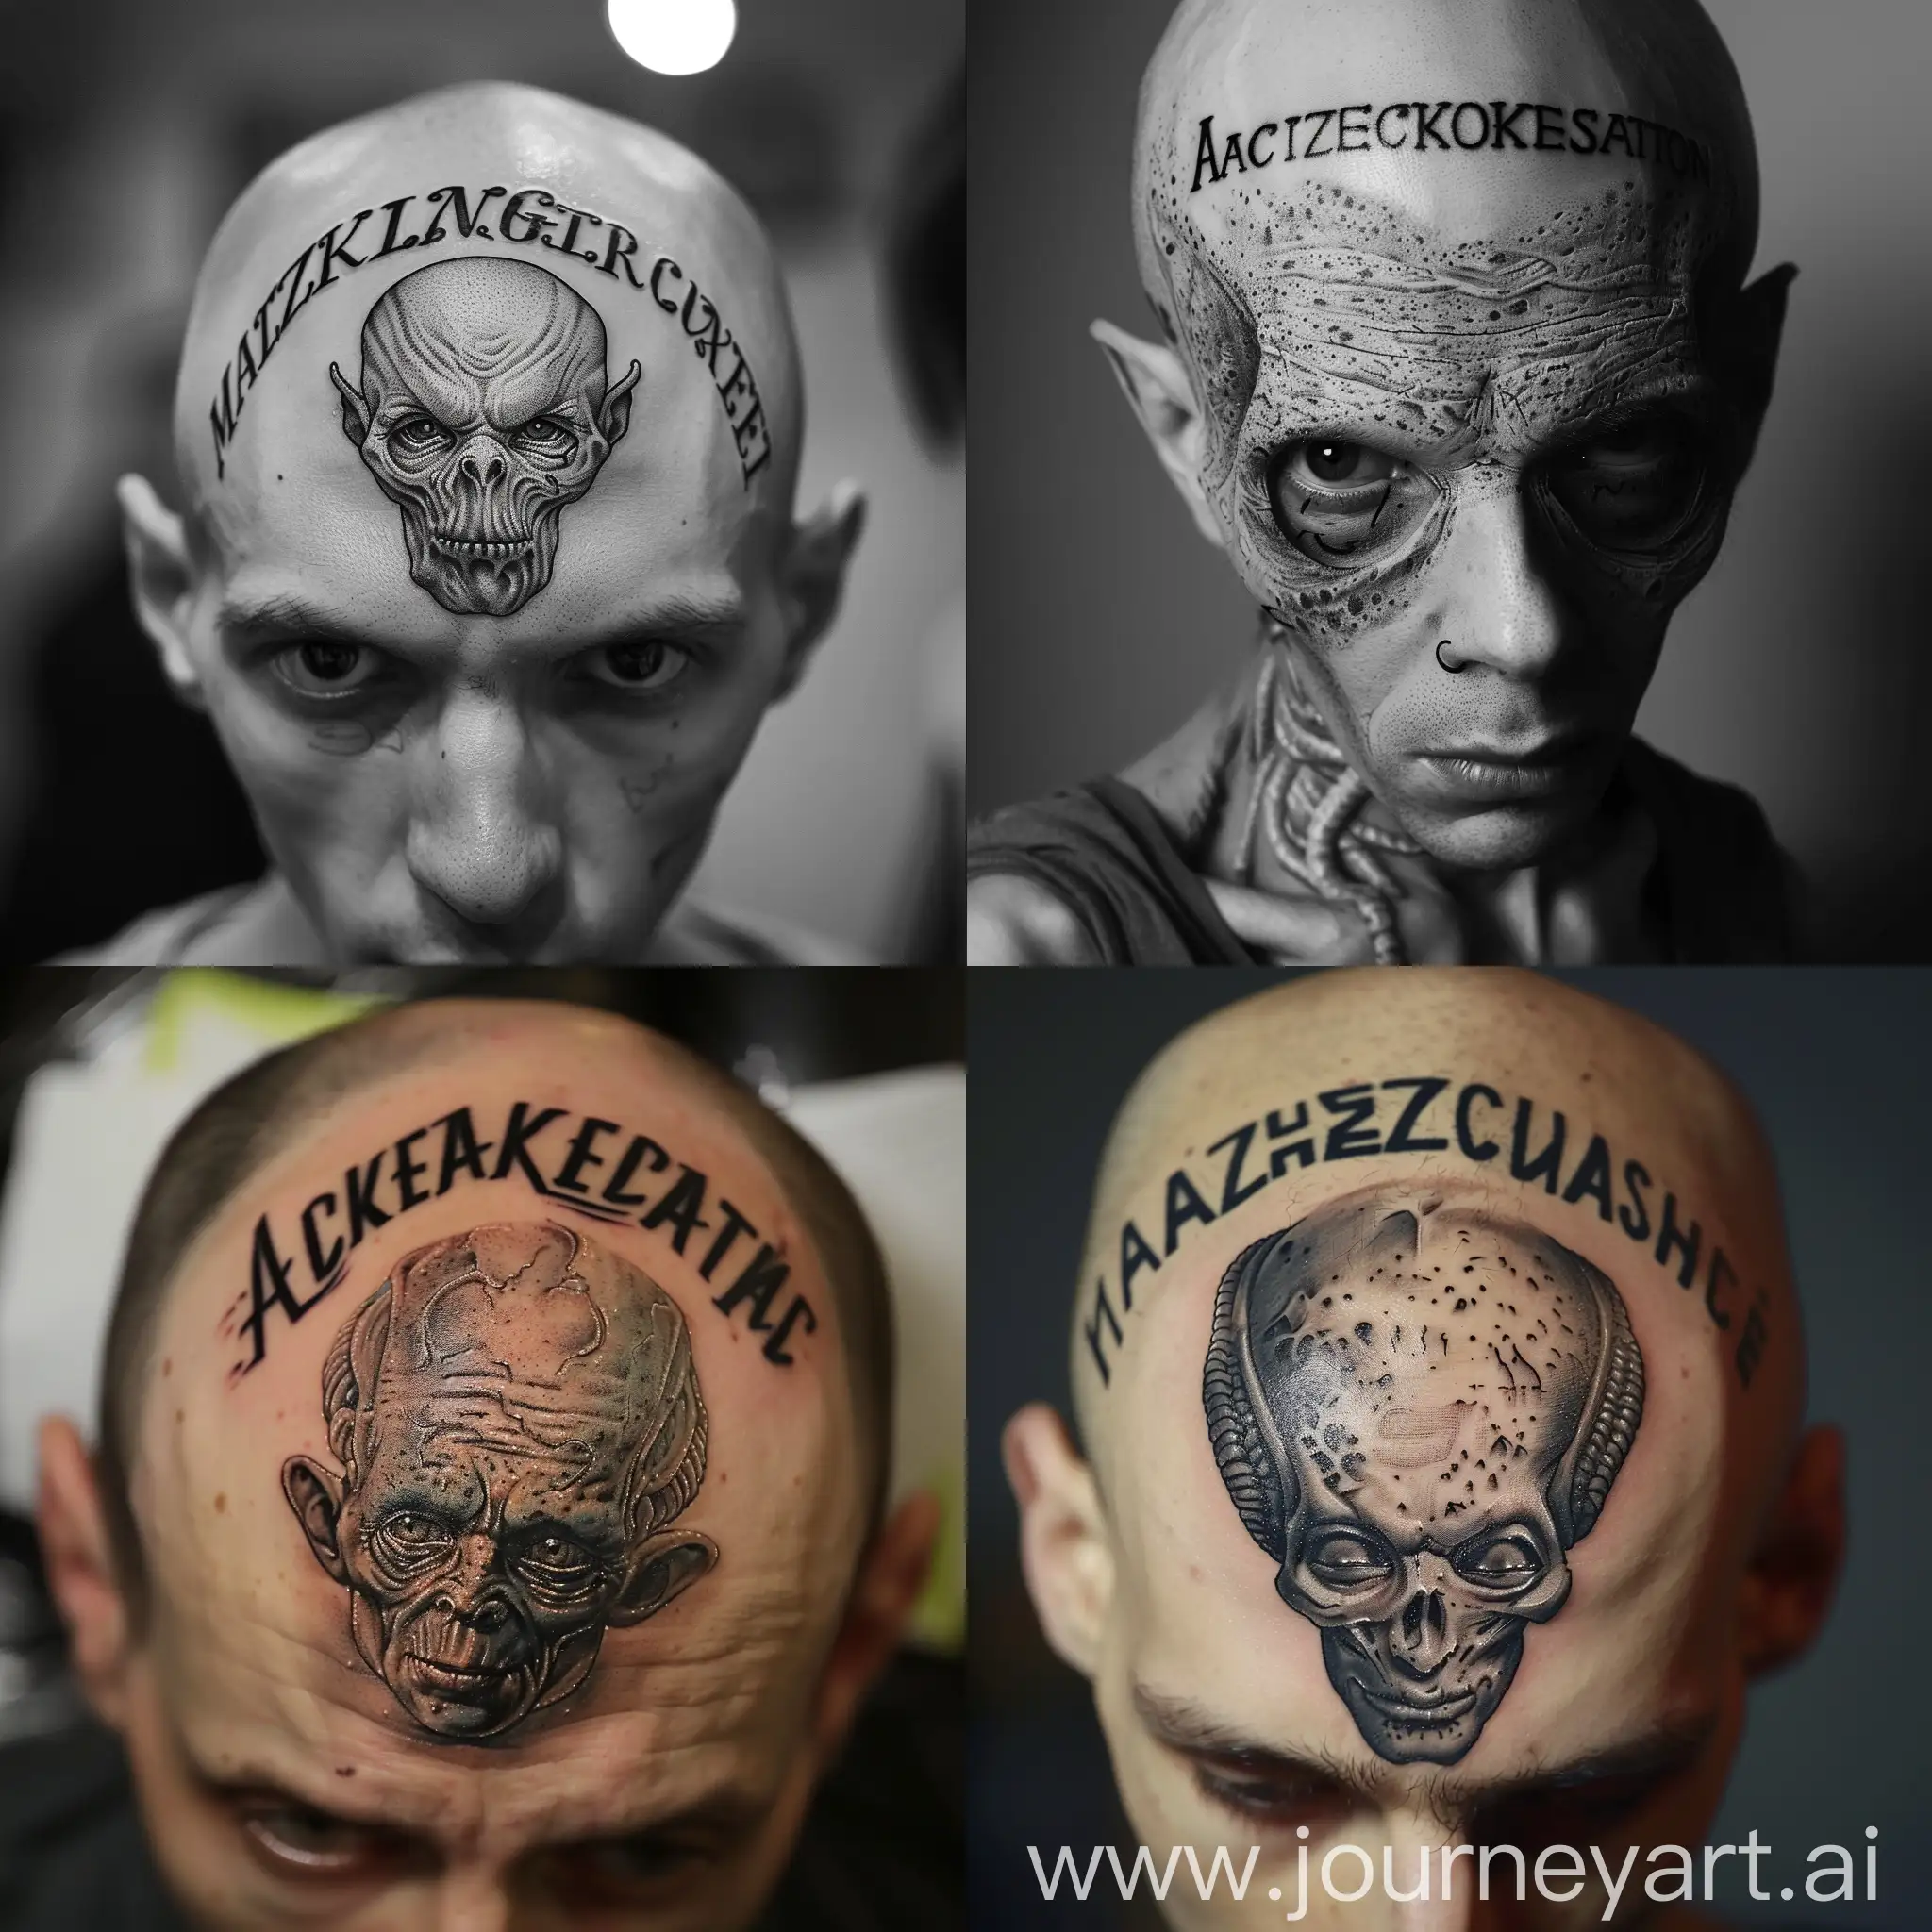 Extraterrestrial-Being-with-Alexander-Tattoo-on-Forehead